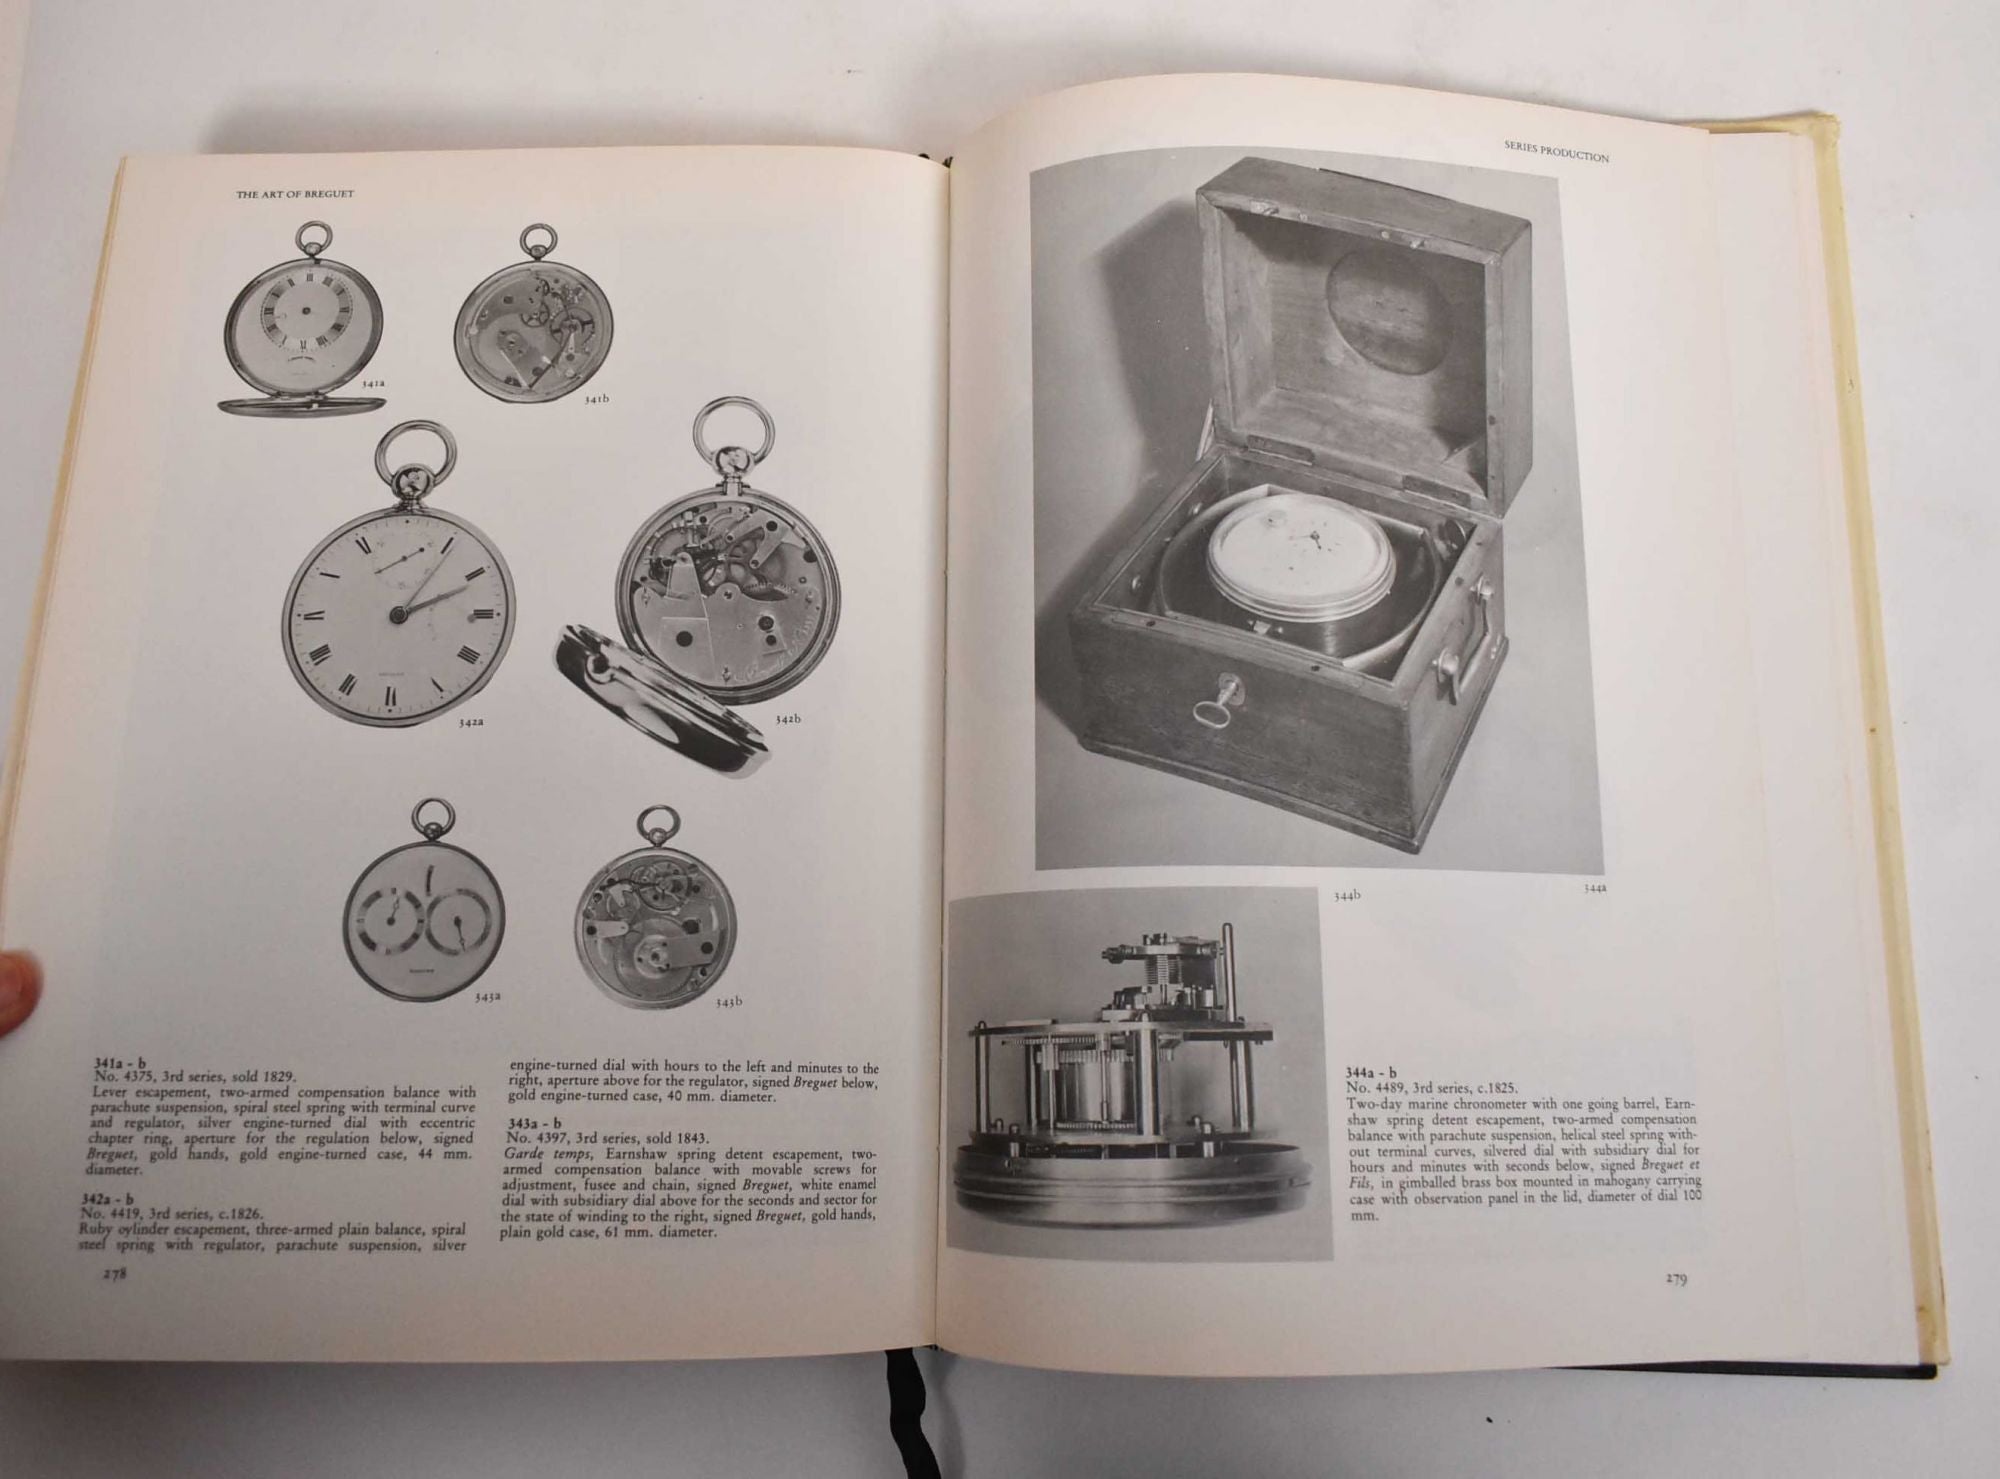 The Art of Breguet by George Daniels on Mullen Books